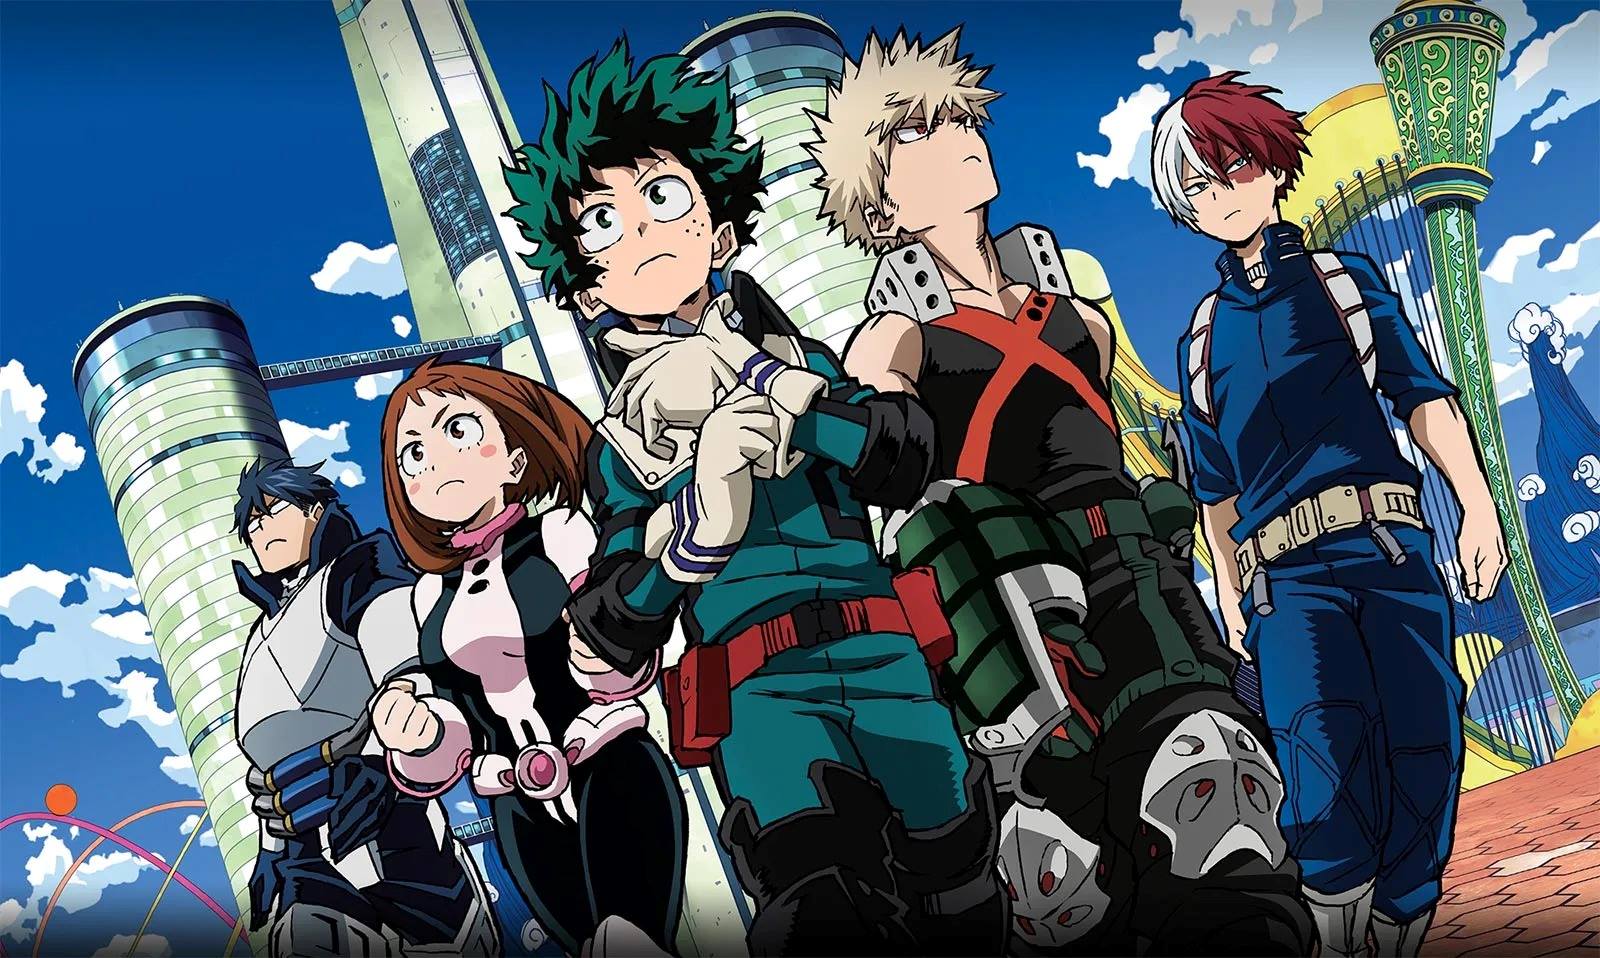 The Shocking Truth About How Many Seasons My Hero Academia Needs To Complete The Manga!